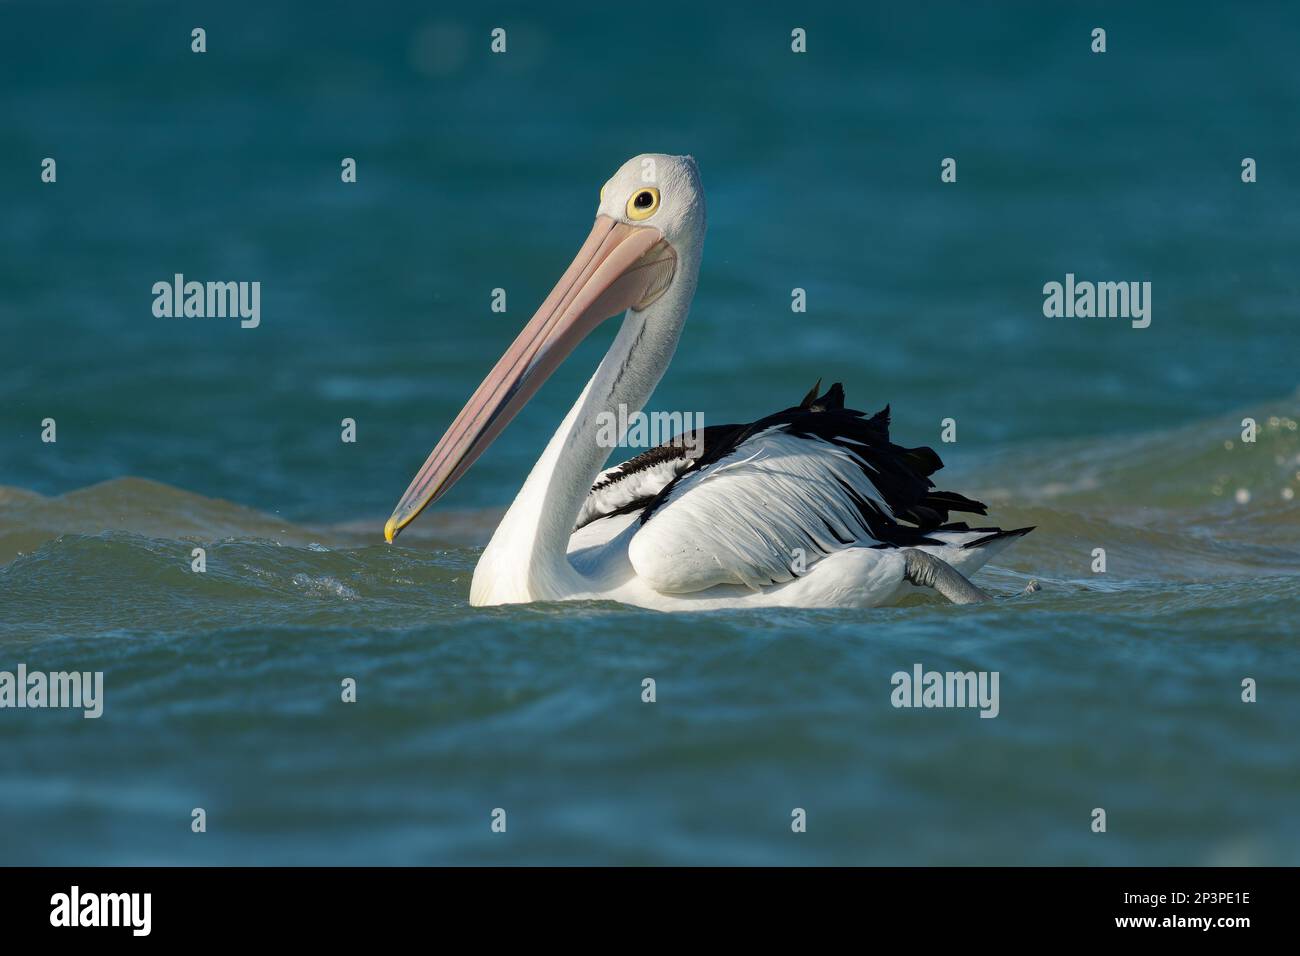 The Australian pelican (Pelecanus conspicillatus) hunts fish in blue ocean, widespread on the inland and coastal waters of Australia and New Guinea an Stock Photo